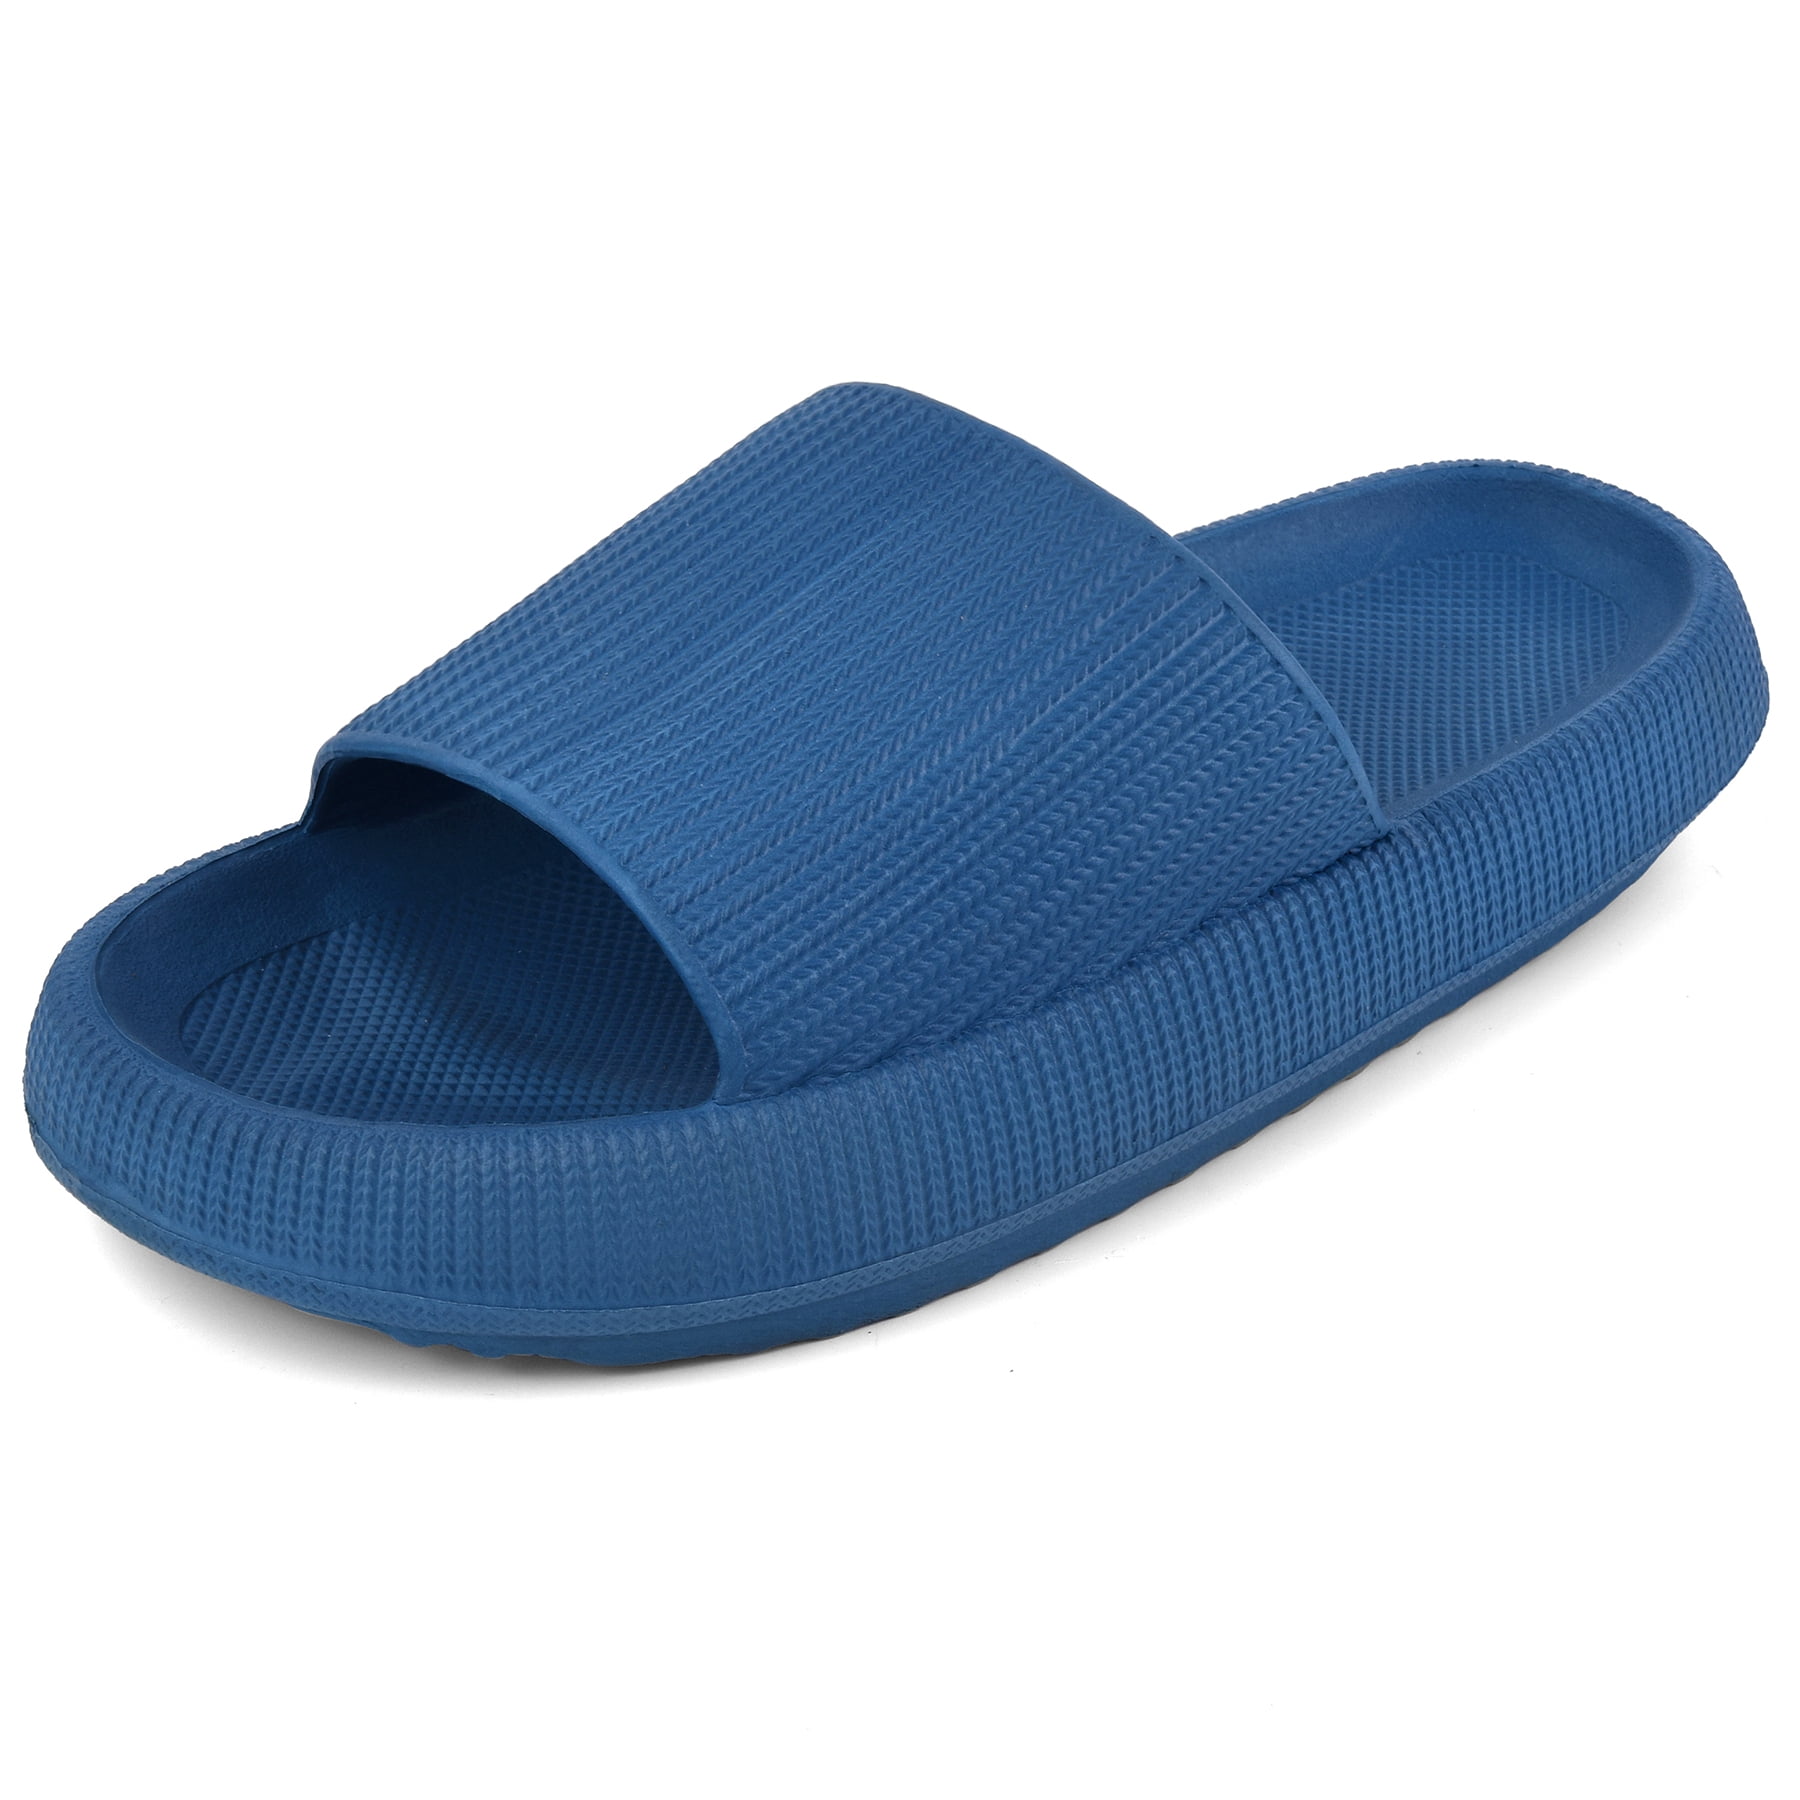 Comfort Pillow Slippers Bathroom Shower Sandals Non-slip with Cloud Cushion Slides for Women and Men 